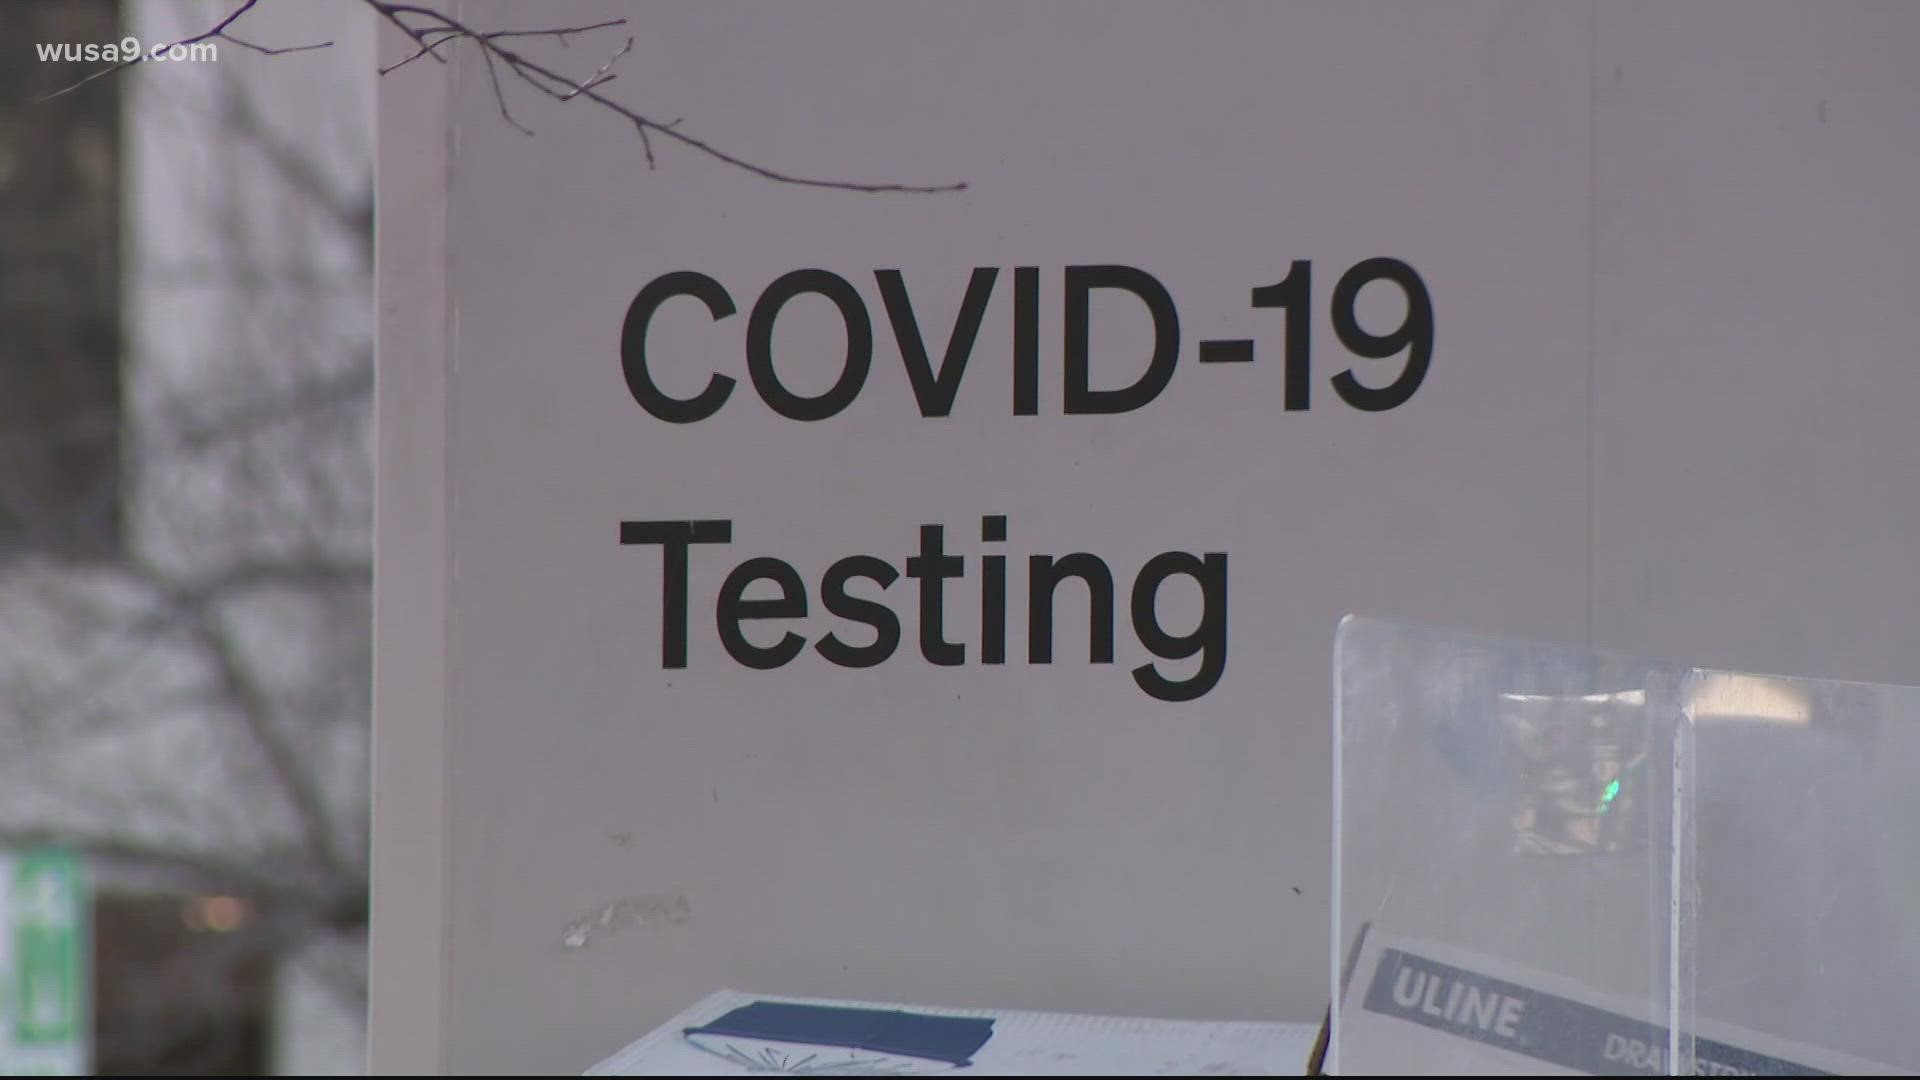 WUSA9 spoke to the Loudoun County Health Director as cases are up in the DMV and the race for finding a COVID-19 test is underway.